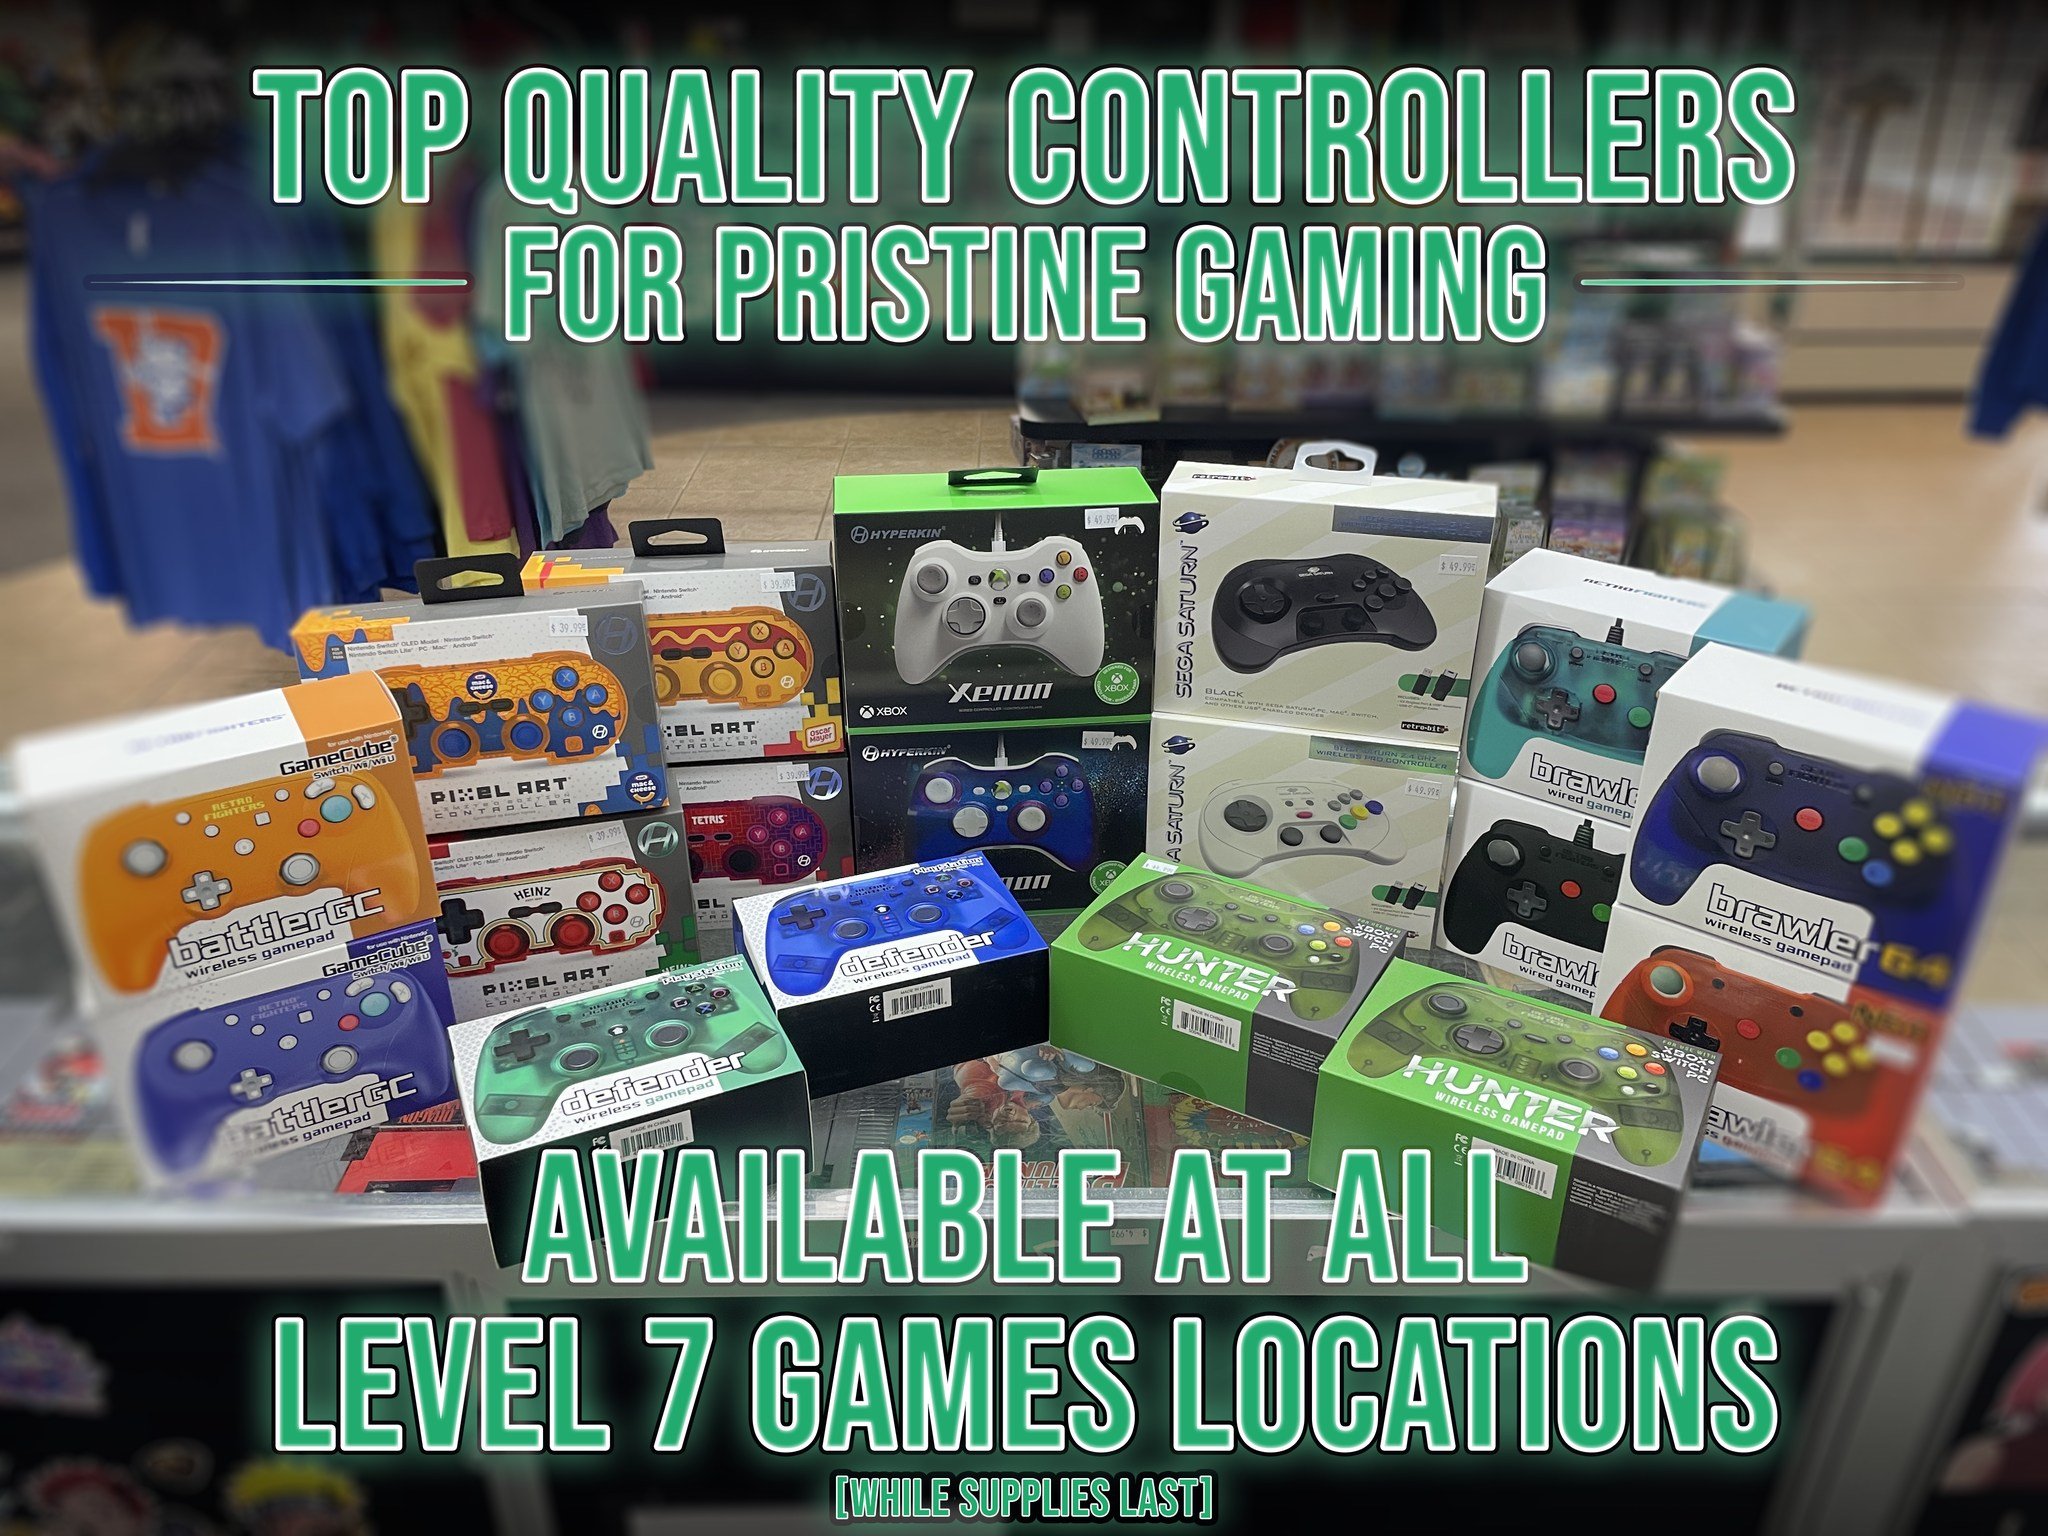 Enhance your gaming experience with a new controller.

Stop by Level 7 Games and prioritize your inner gamer.

#controllers #consoles #ps4 #xbox #switch #gaming #games #videogames #gamers #retrogames #shop #shopping #buynow #store #localshop #denver 